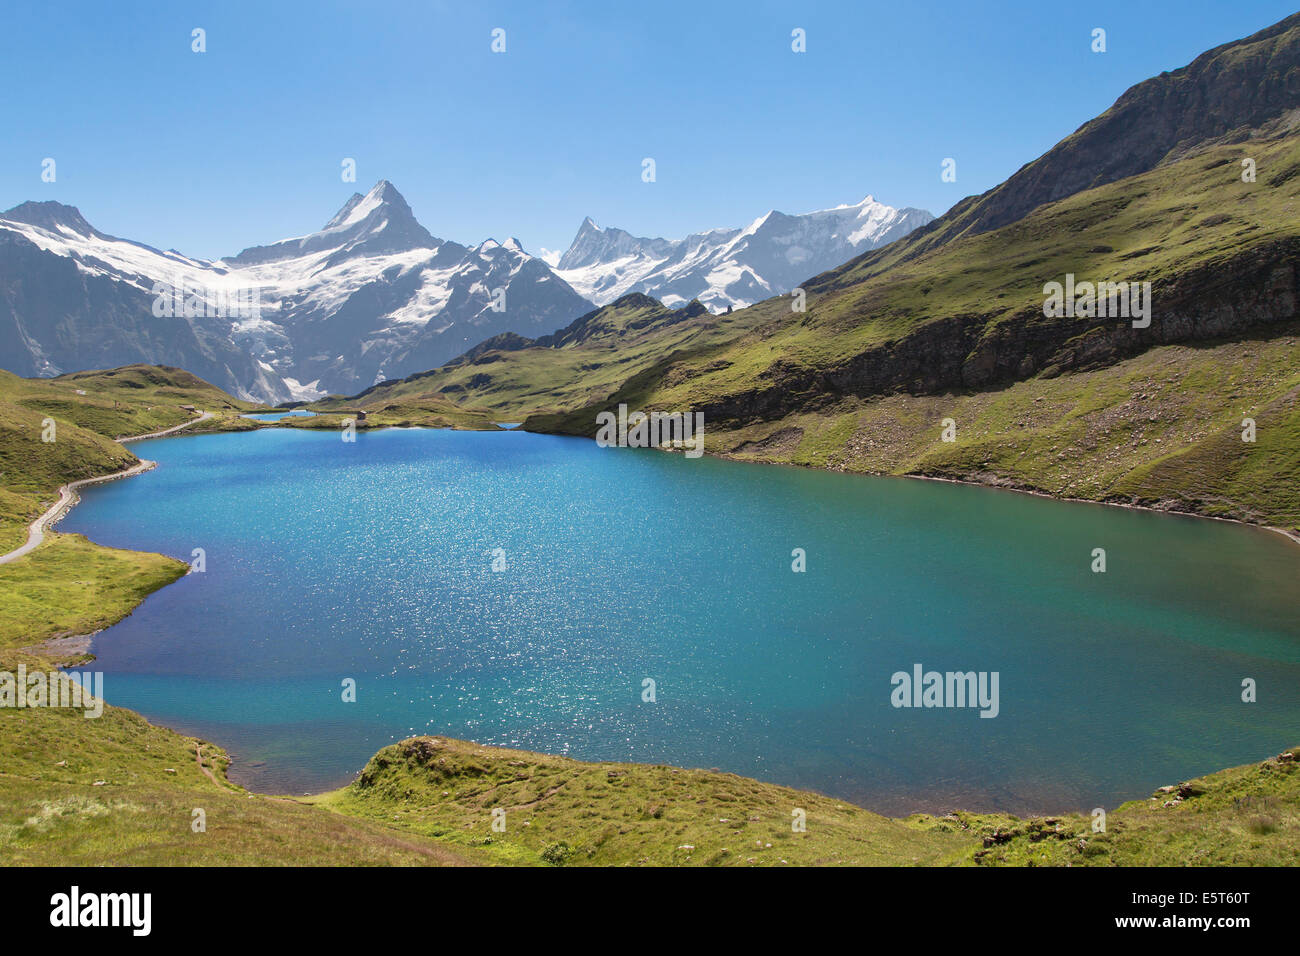 Lake Bachalpsee in Grindelwald, Swiss Alps. Stock Photo